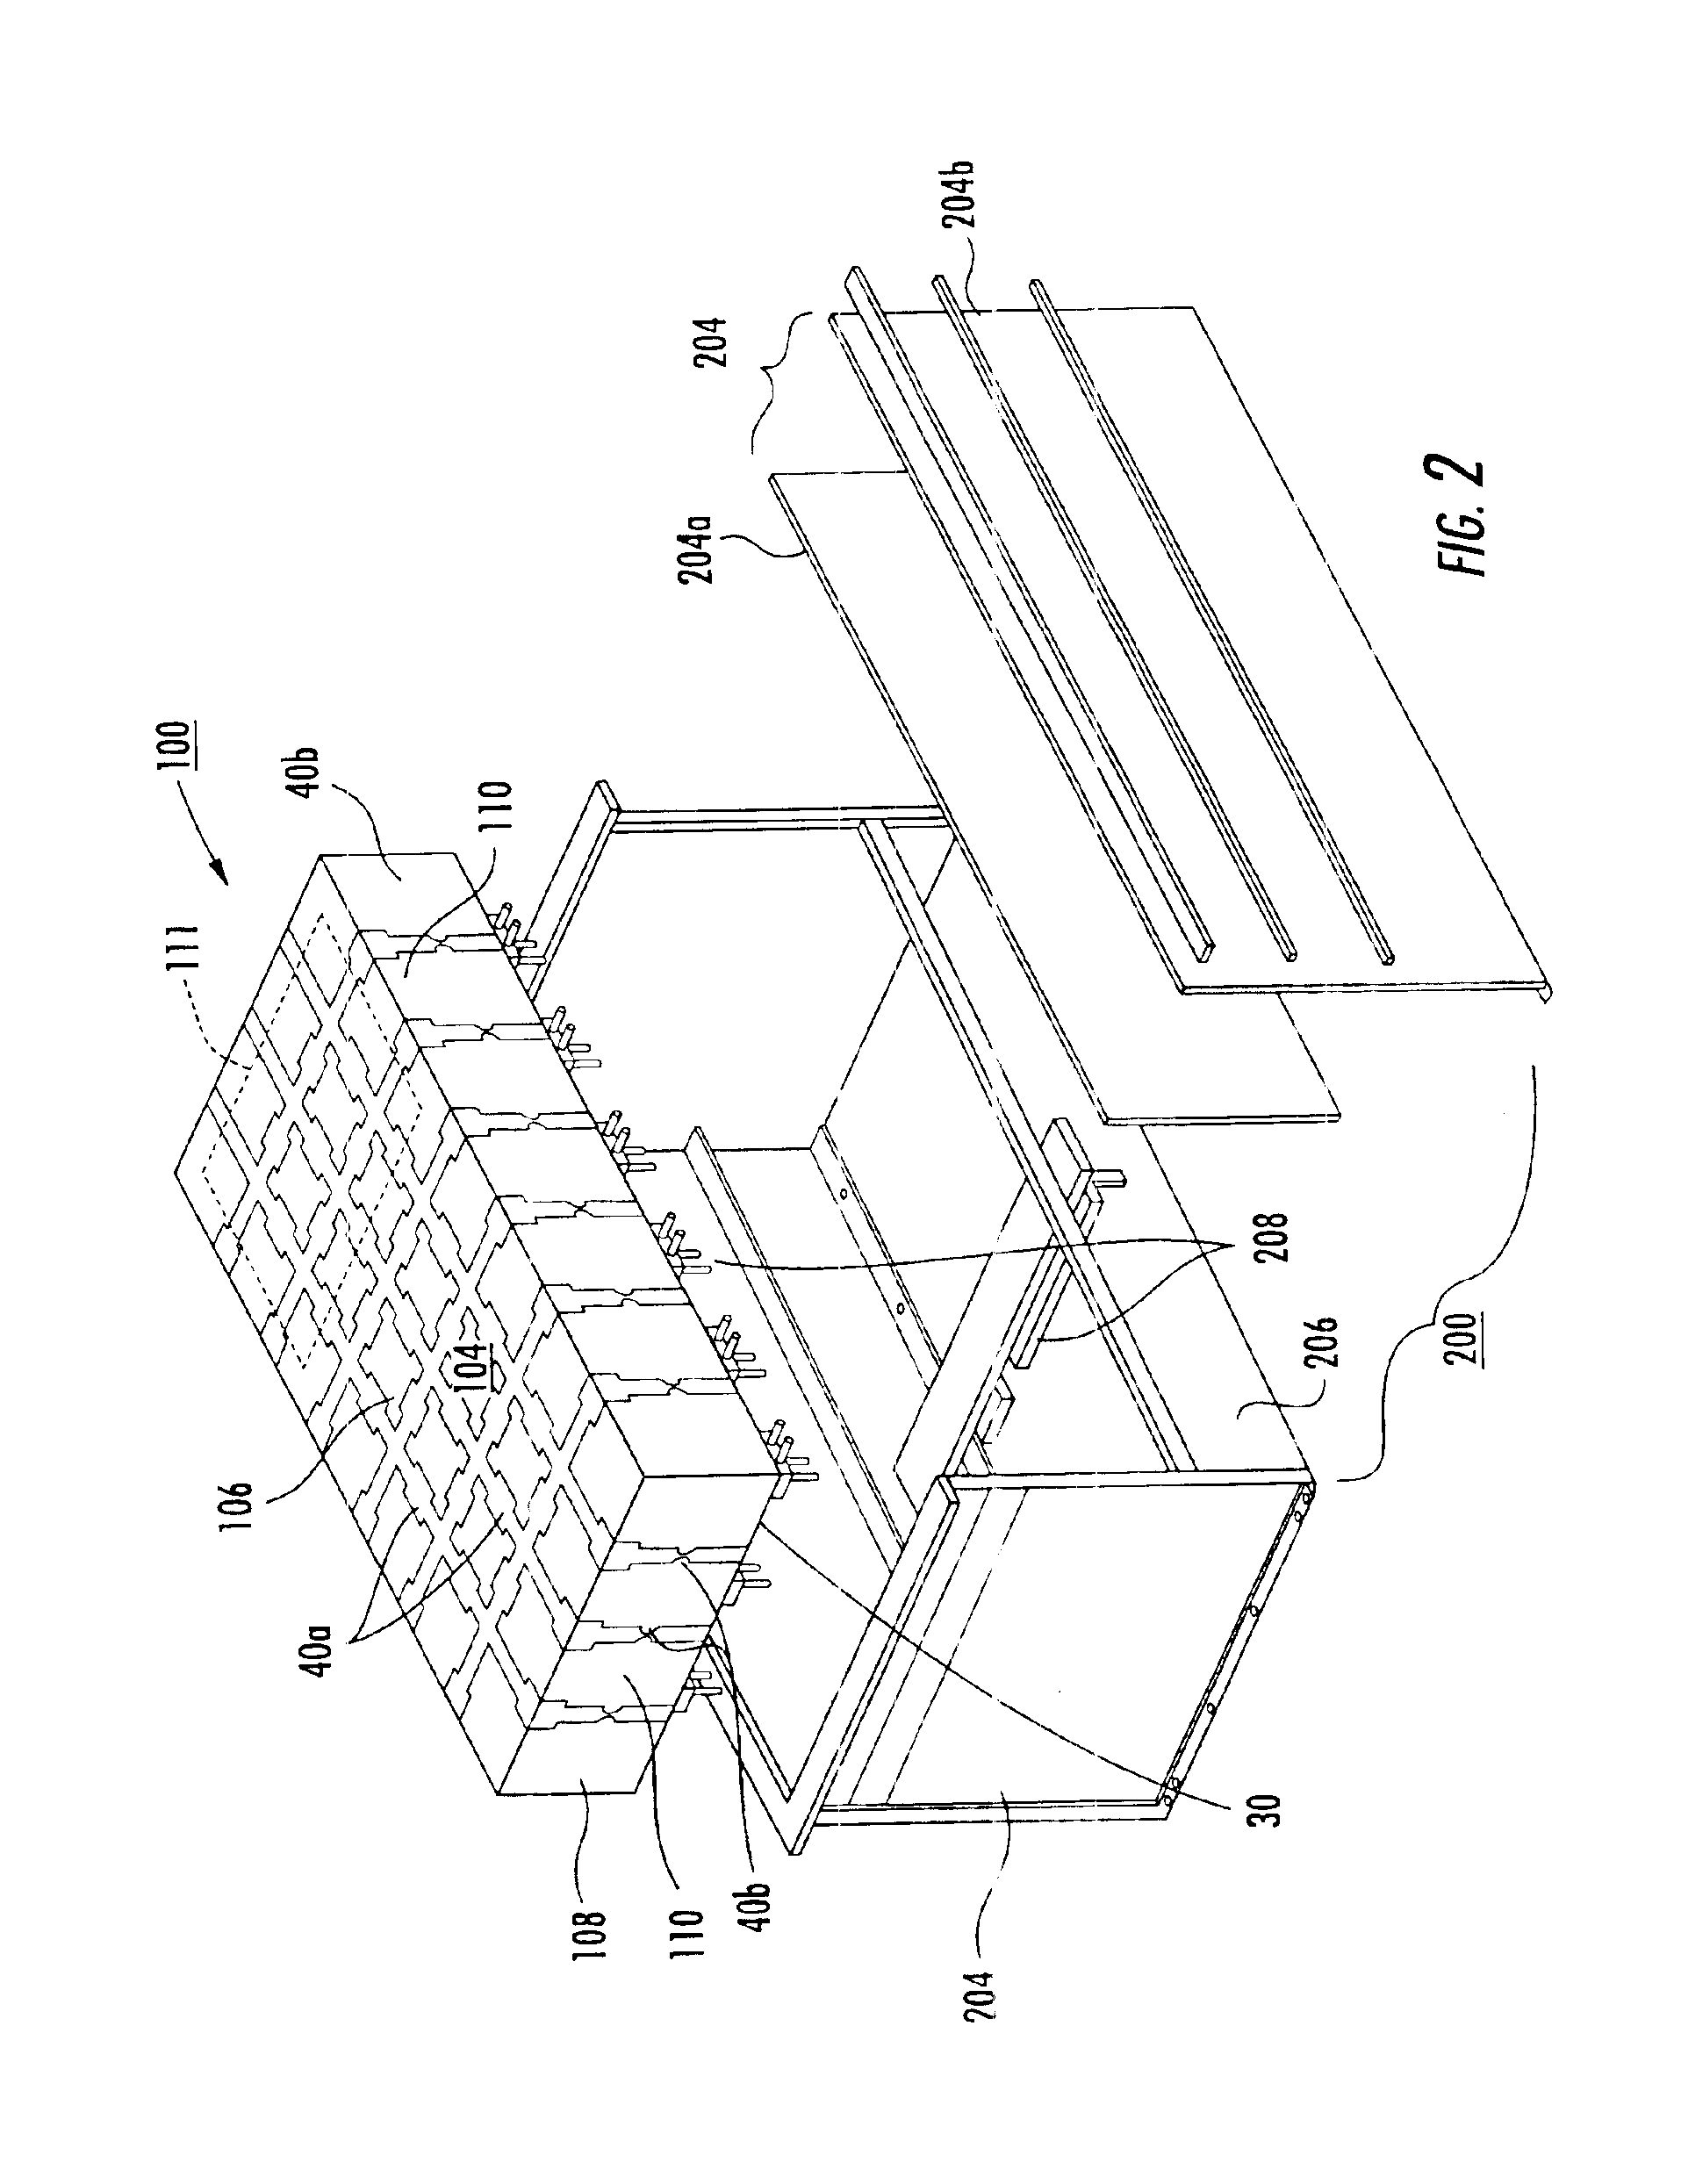 Phased array antenna with discrete capacitive coupling and associated methods